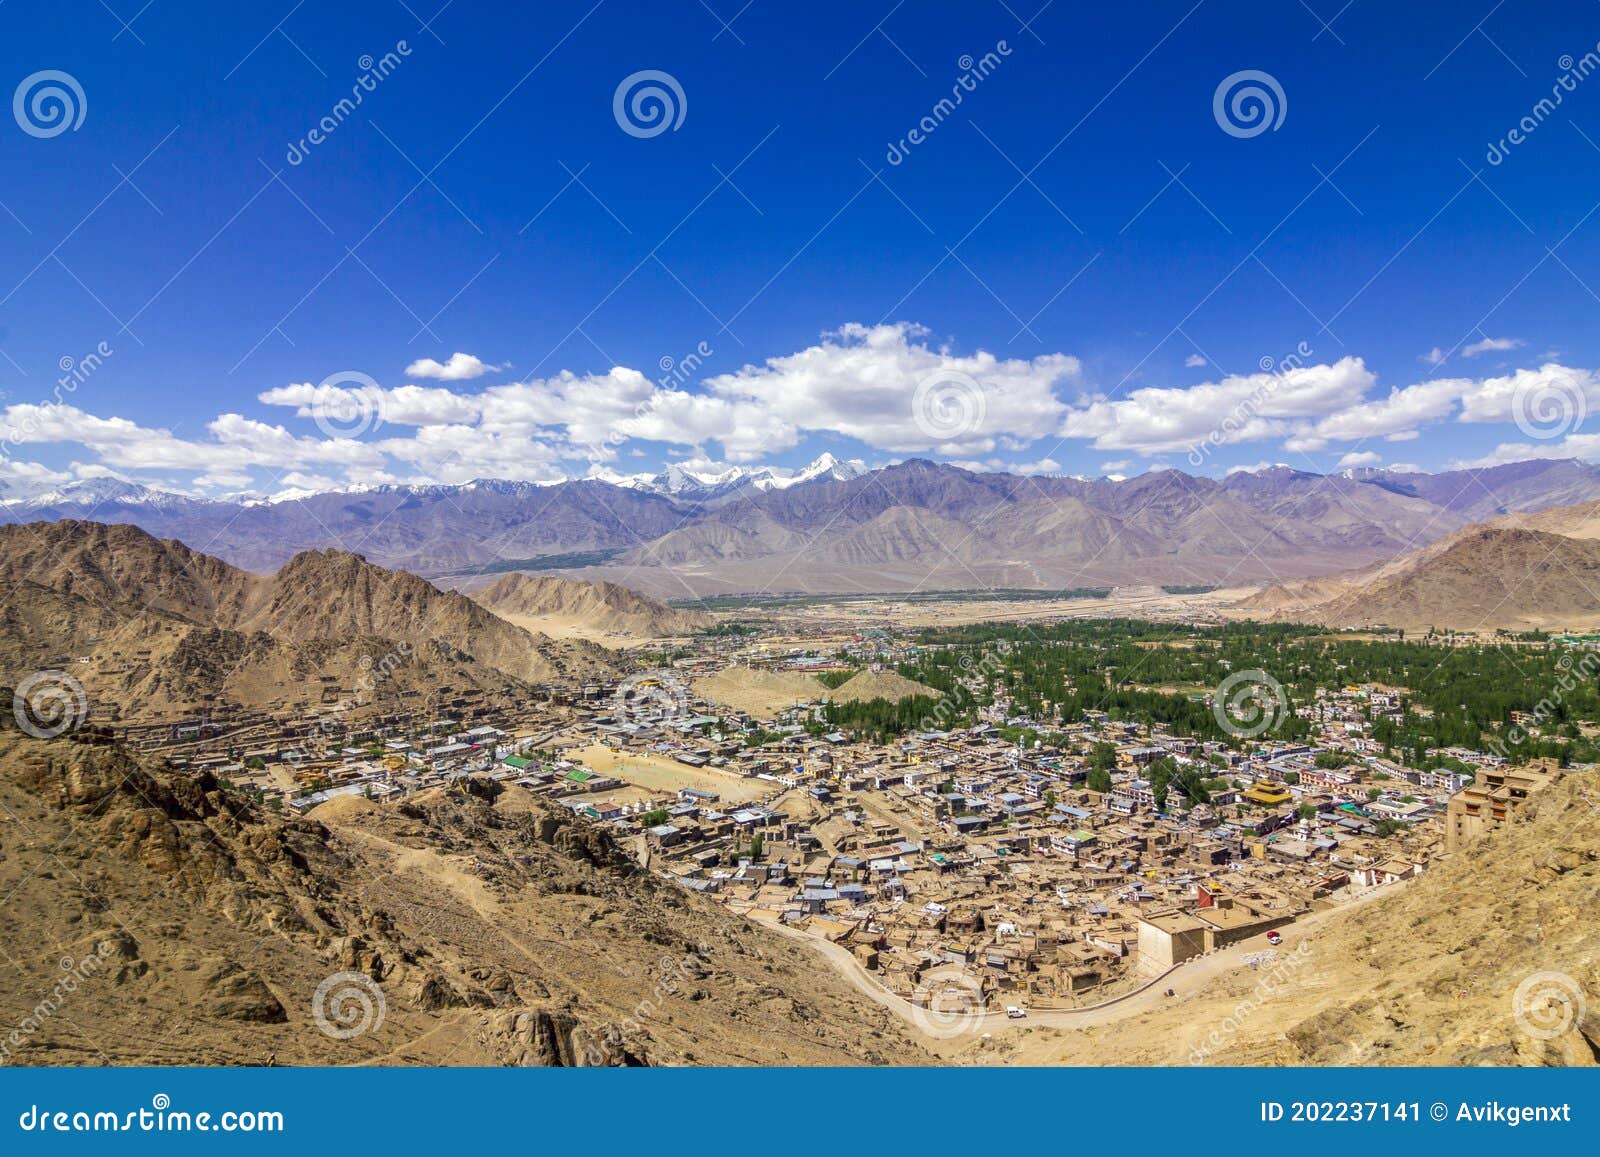 mountain city kargil located in the bed of high himalayan mountain amidst srinagar leh highway